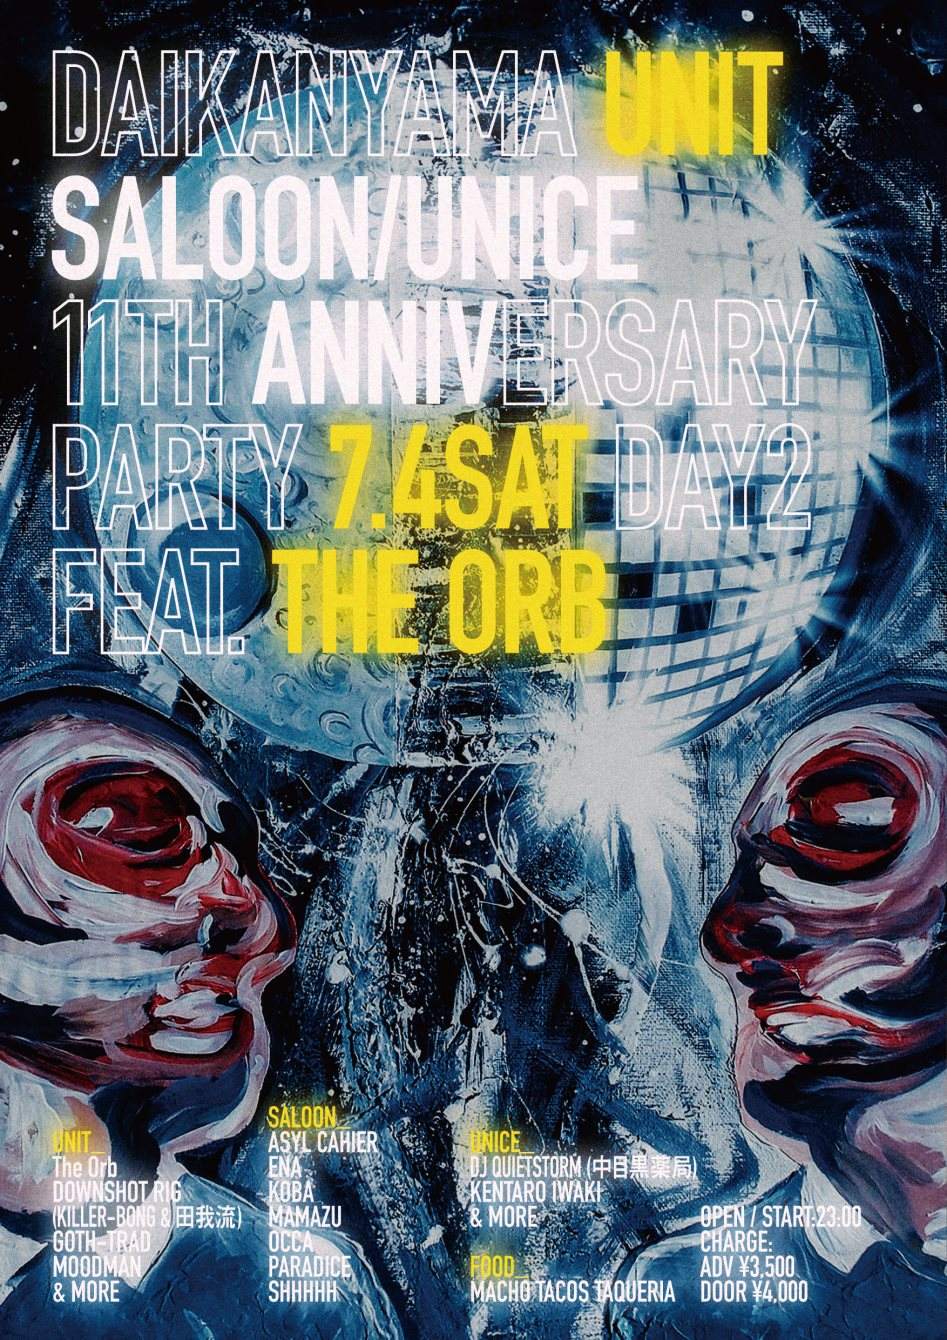 Daikanyama Unit/Saloon/Unice 11th Anniversary Party Featuring: The Orb - フライヤー表